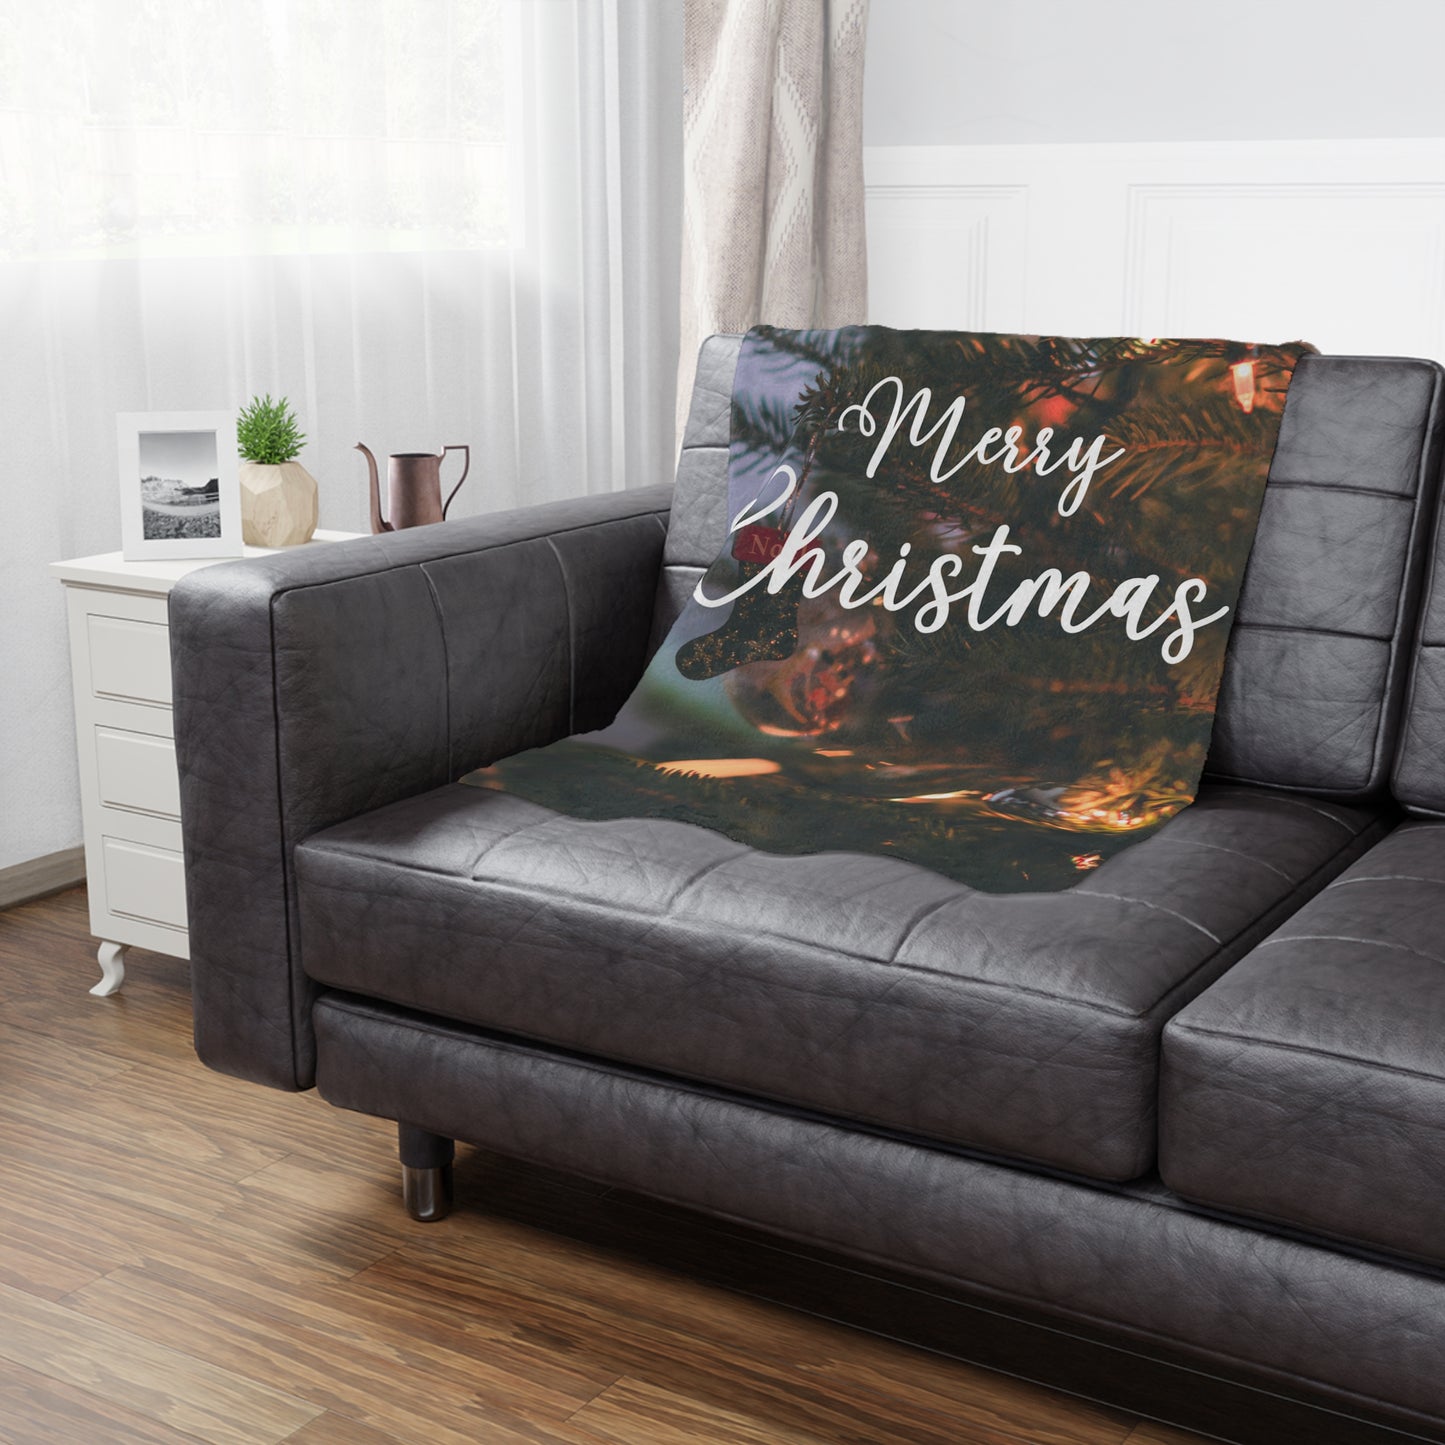 Merry Christmas with Ornament Printed Minky Blanket